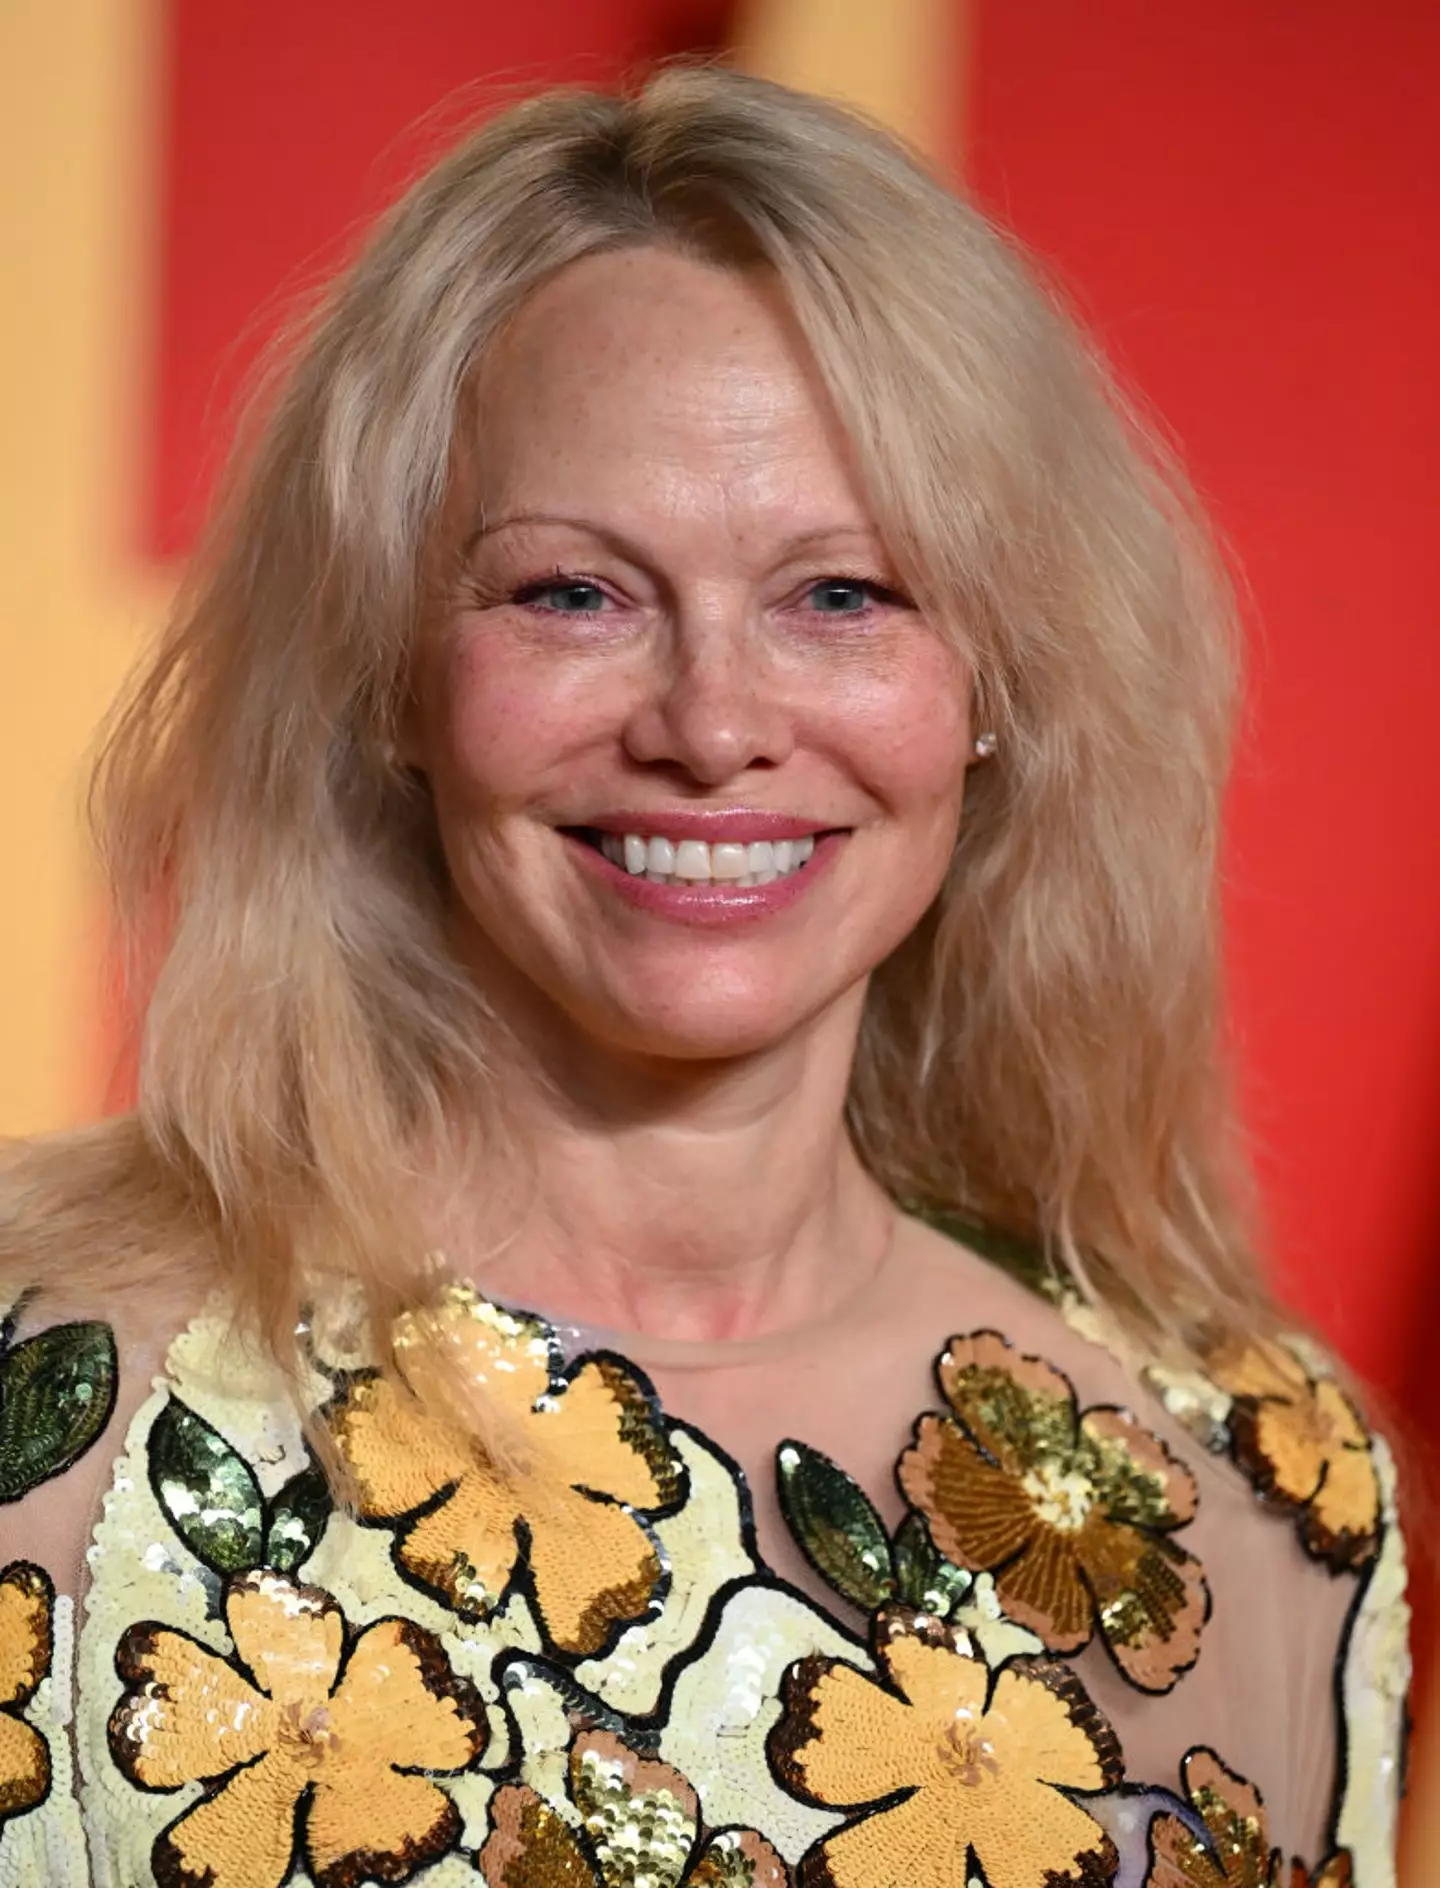 Pamela Anderson went make-up-free at the Oscars over the weekend (10 March).